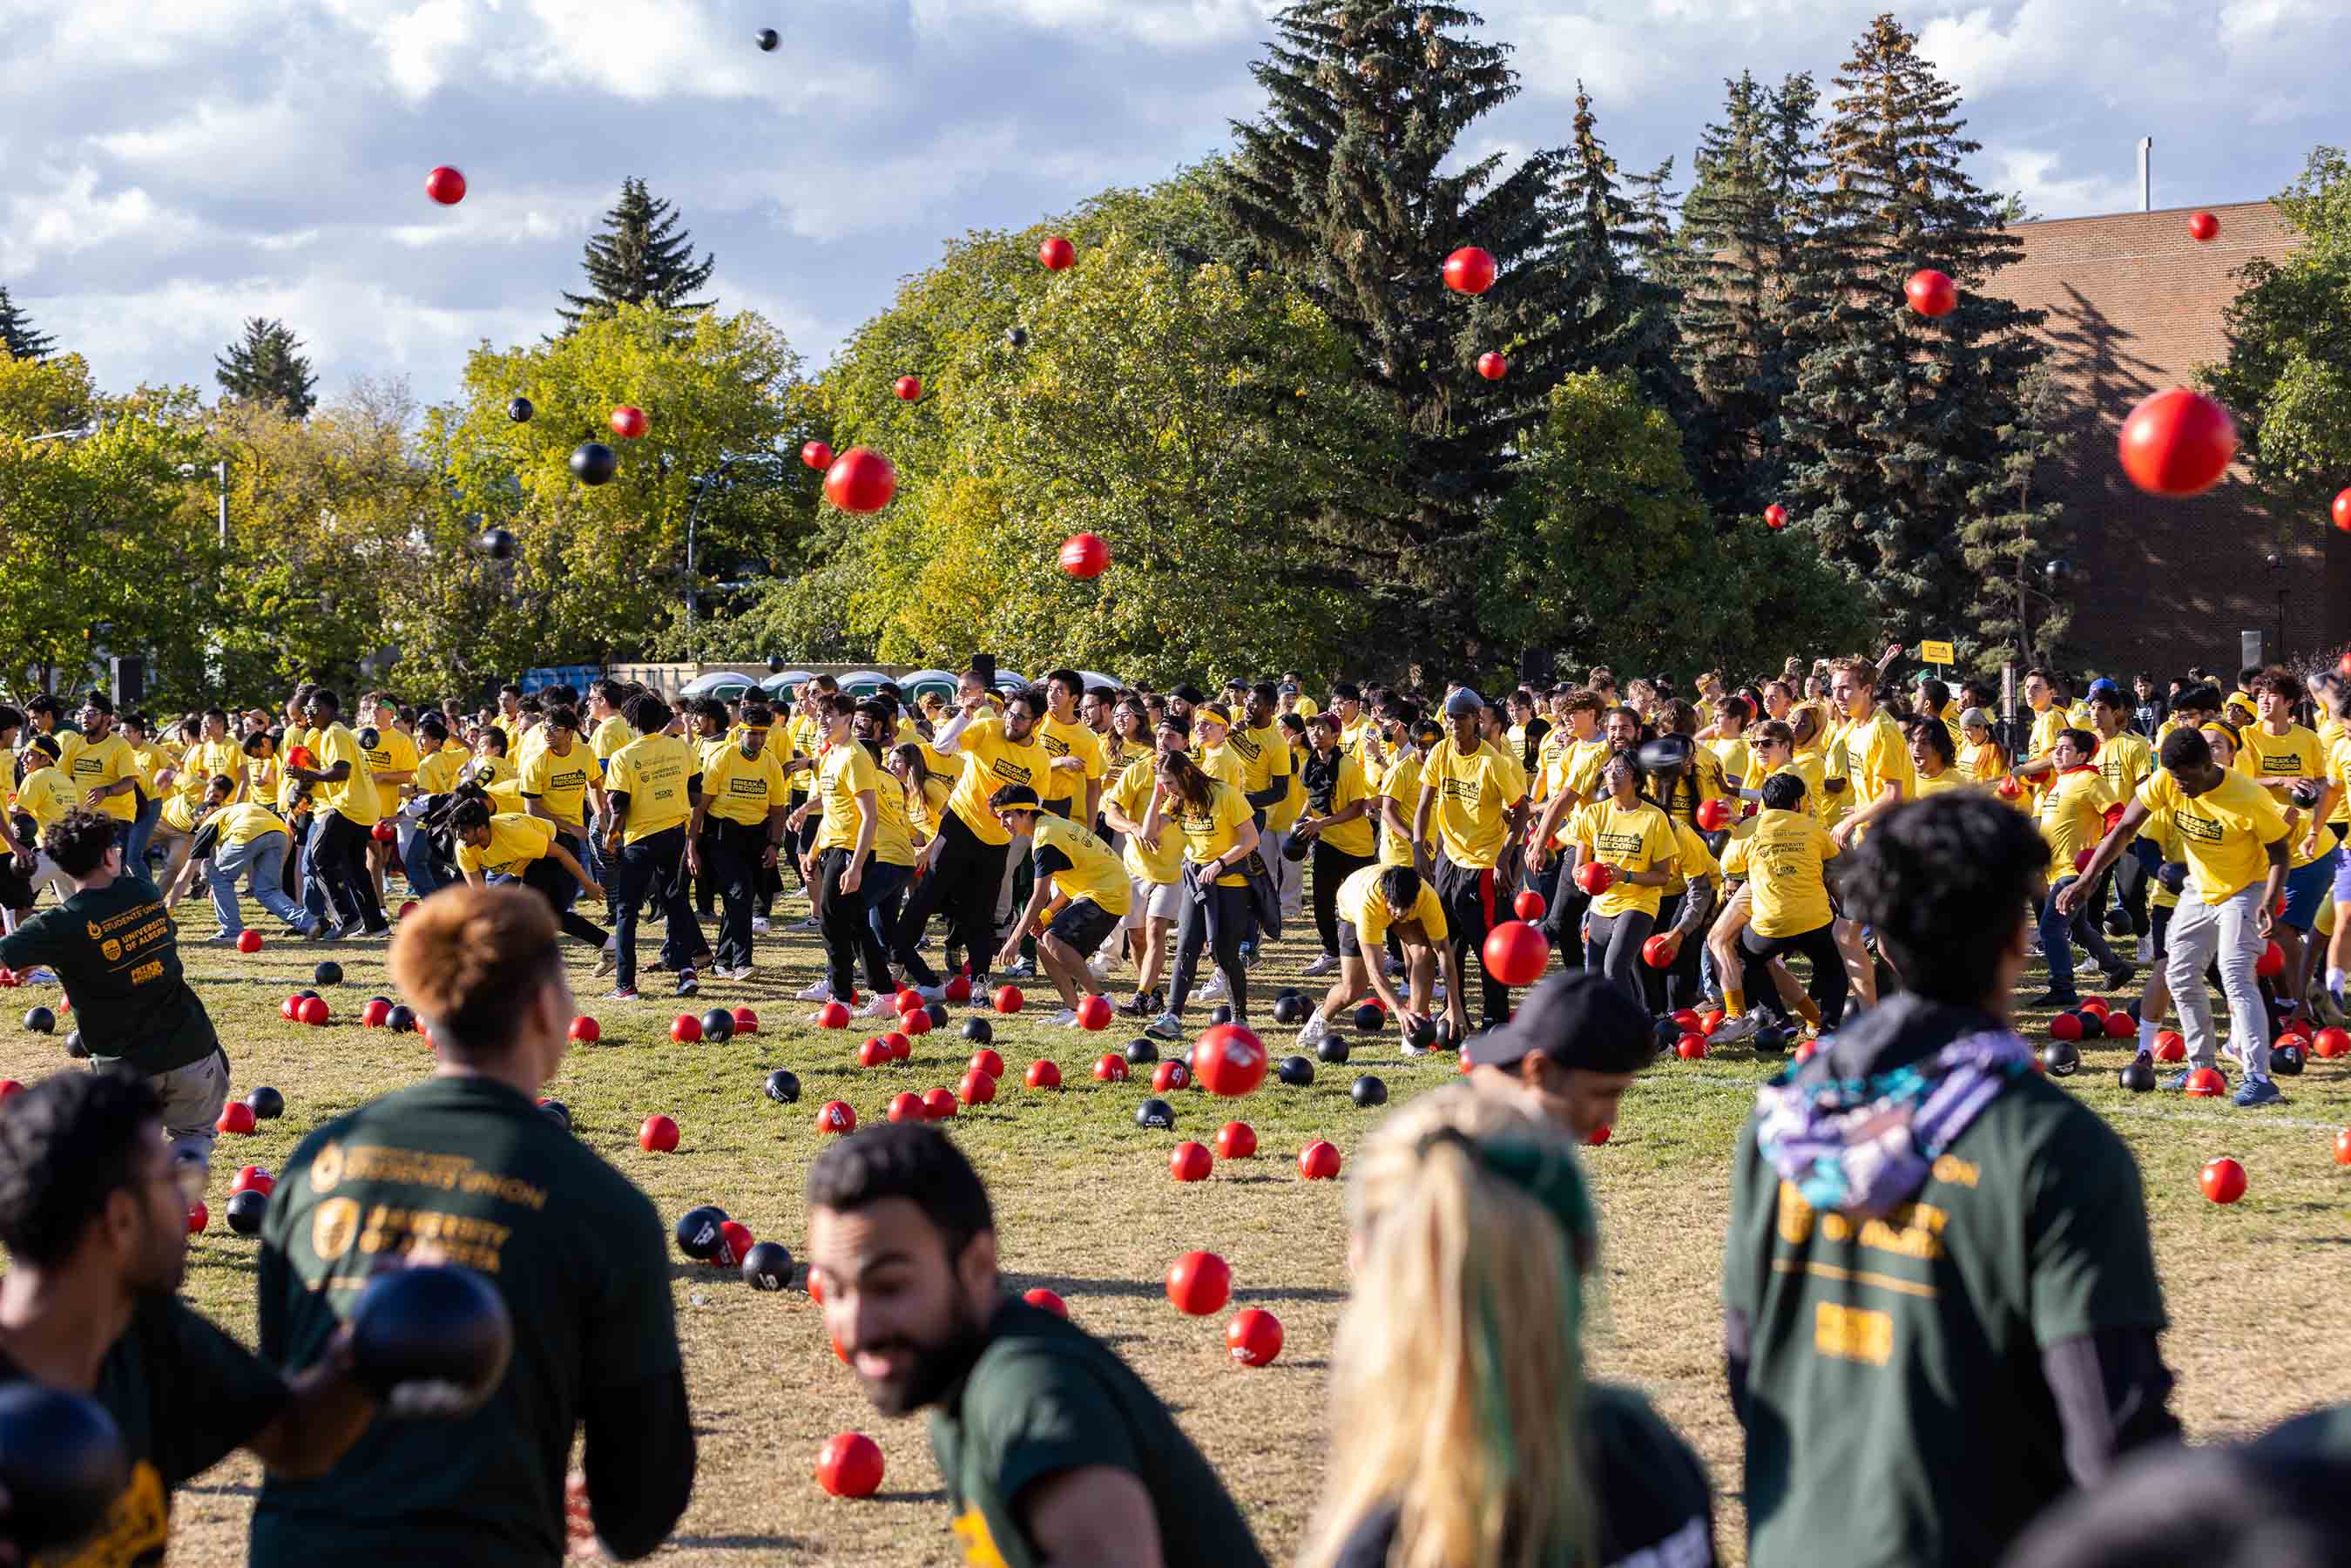 Participants attempt to break the record for most participants in a dodgeball game